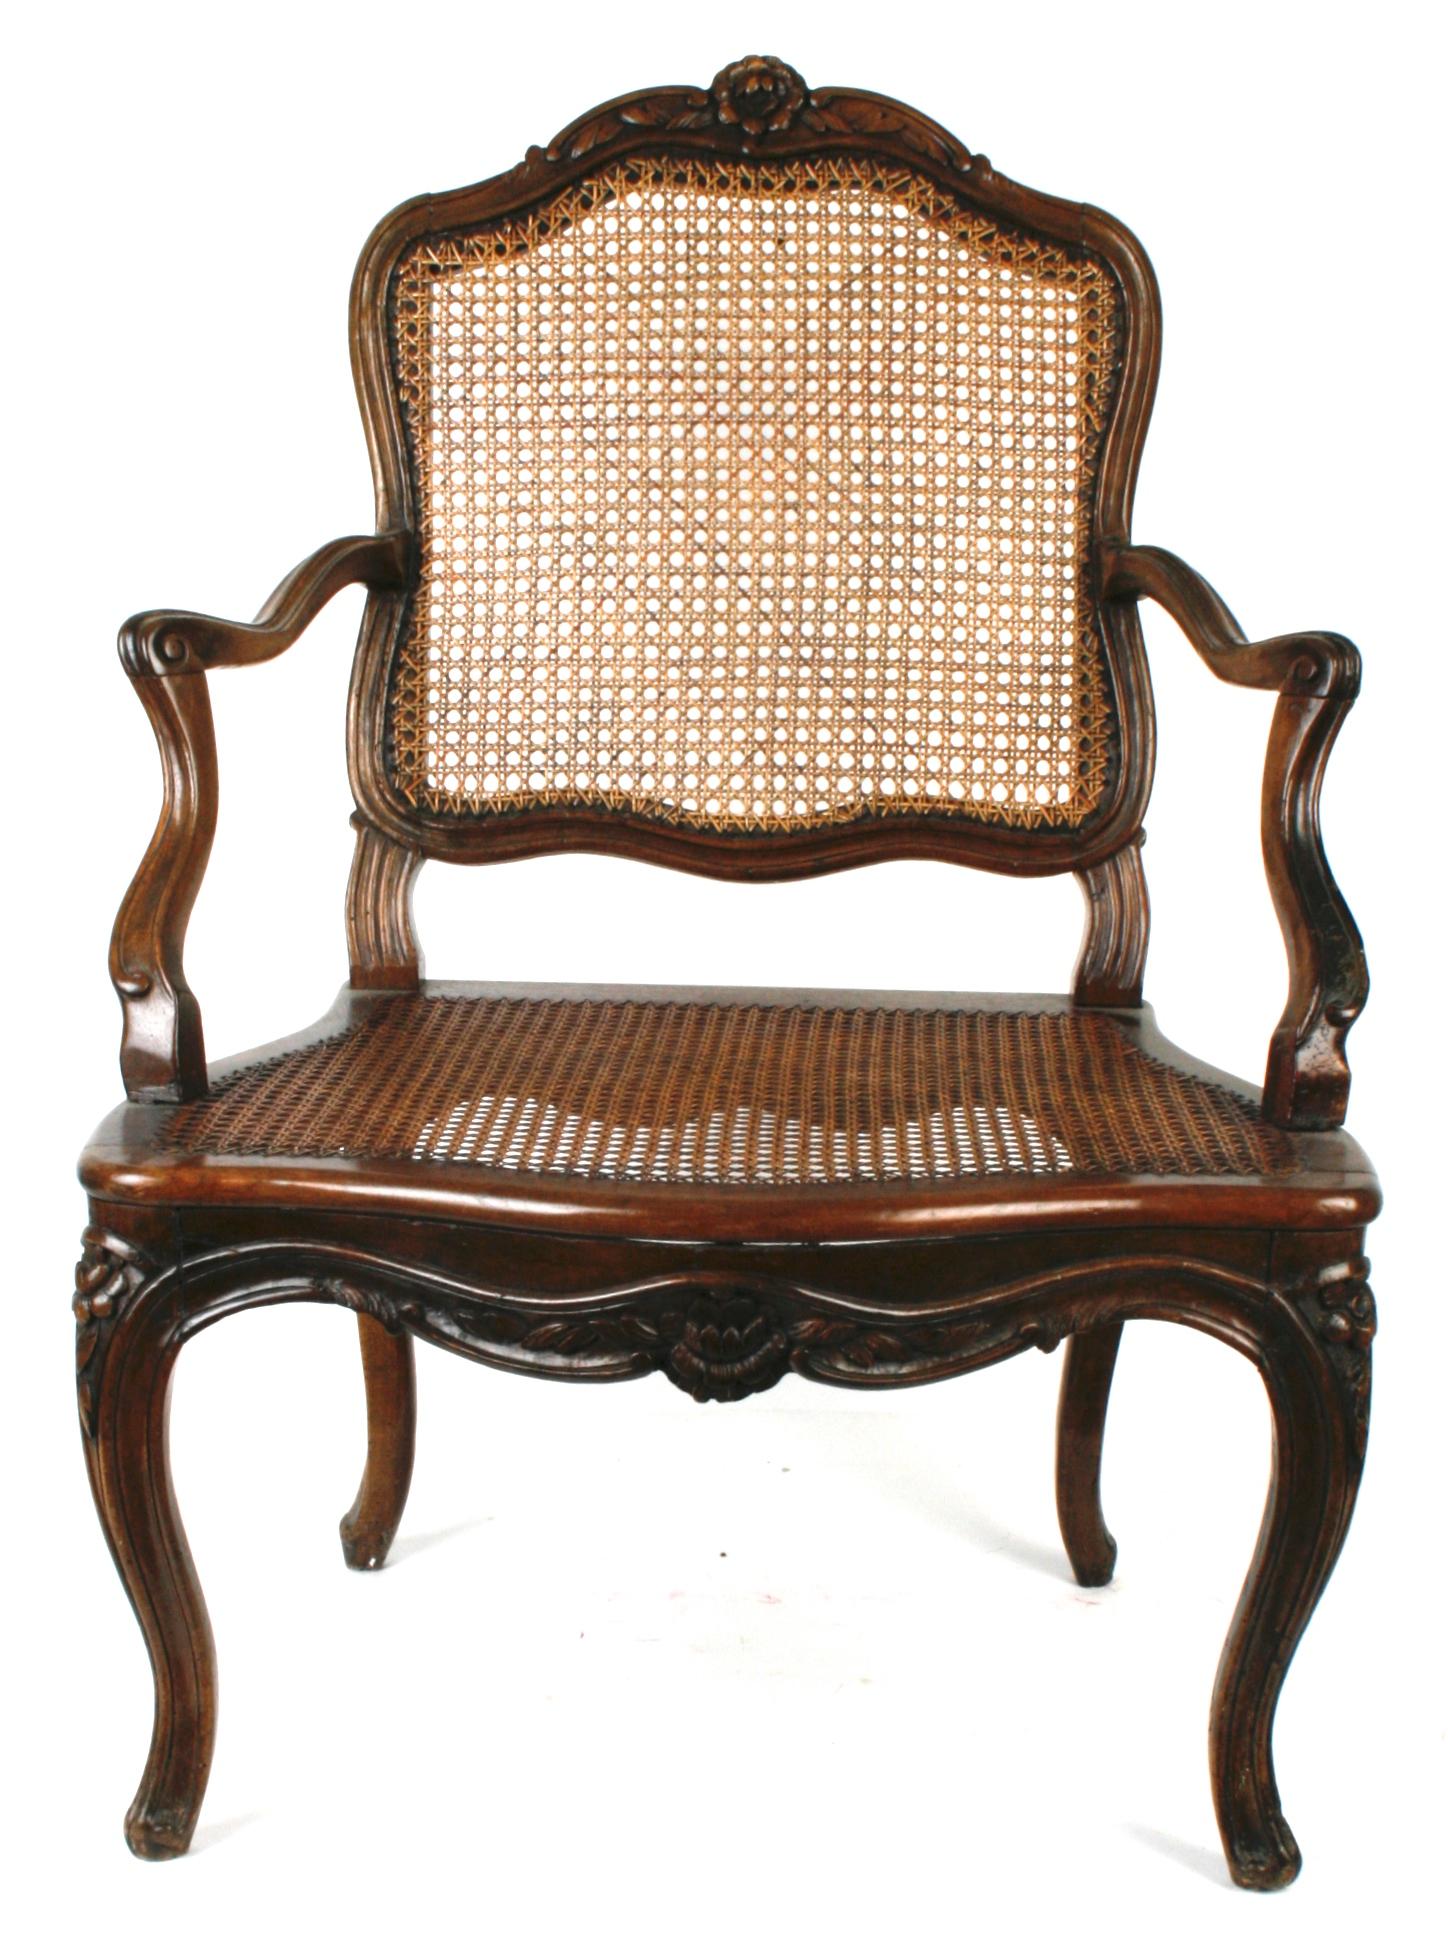 An early 18th century French carved walnut armchair with hand-caned seat and back. The frame is constructed in the customary 18th c Louis XV manner with pinned mortise and tenon and is carved with a scrolled floral design and raised on cabriole legs